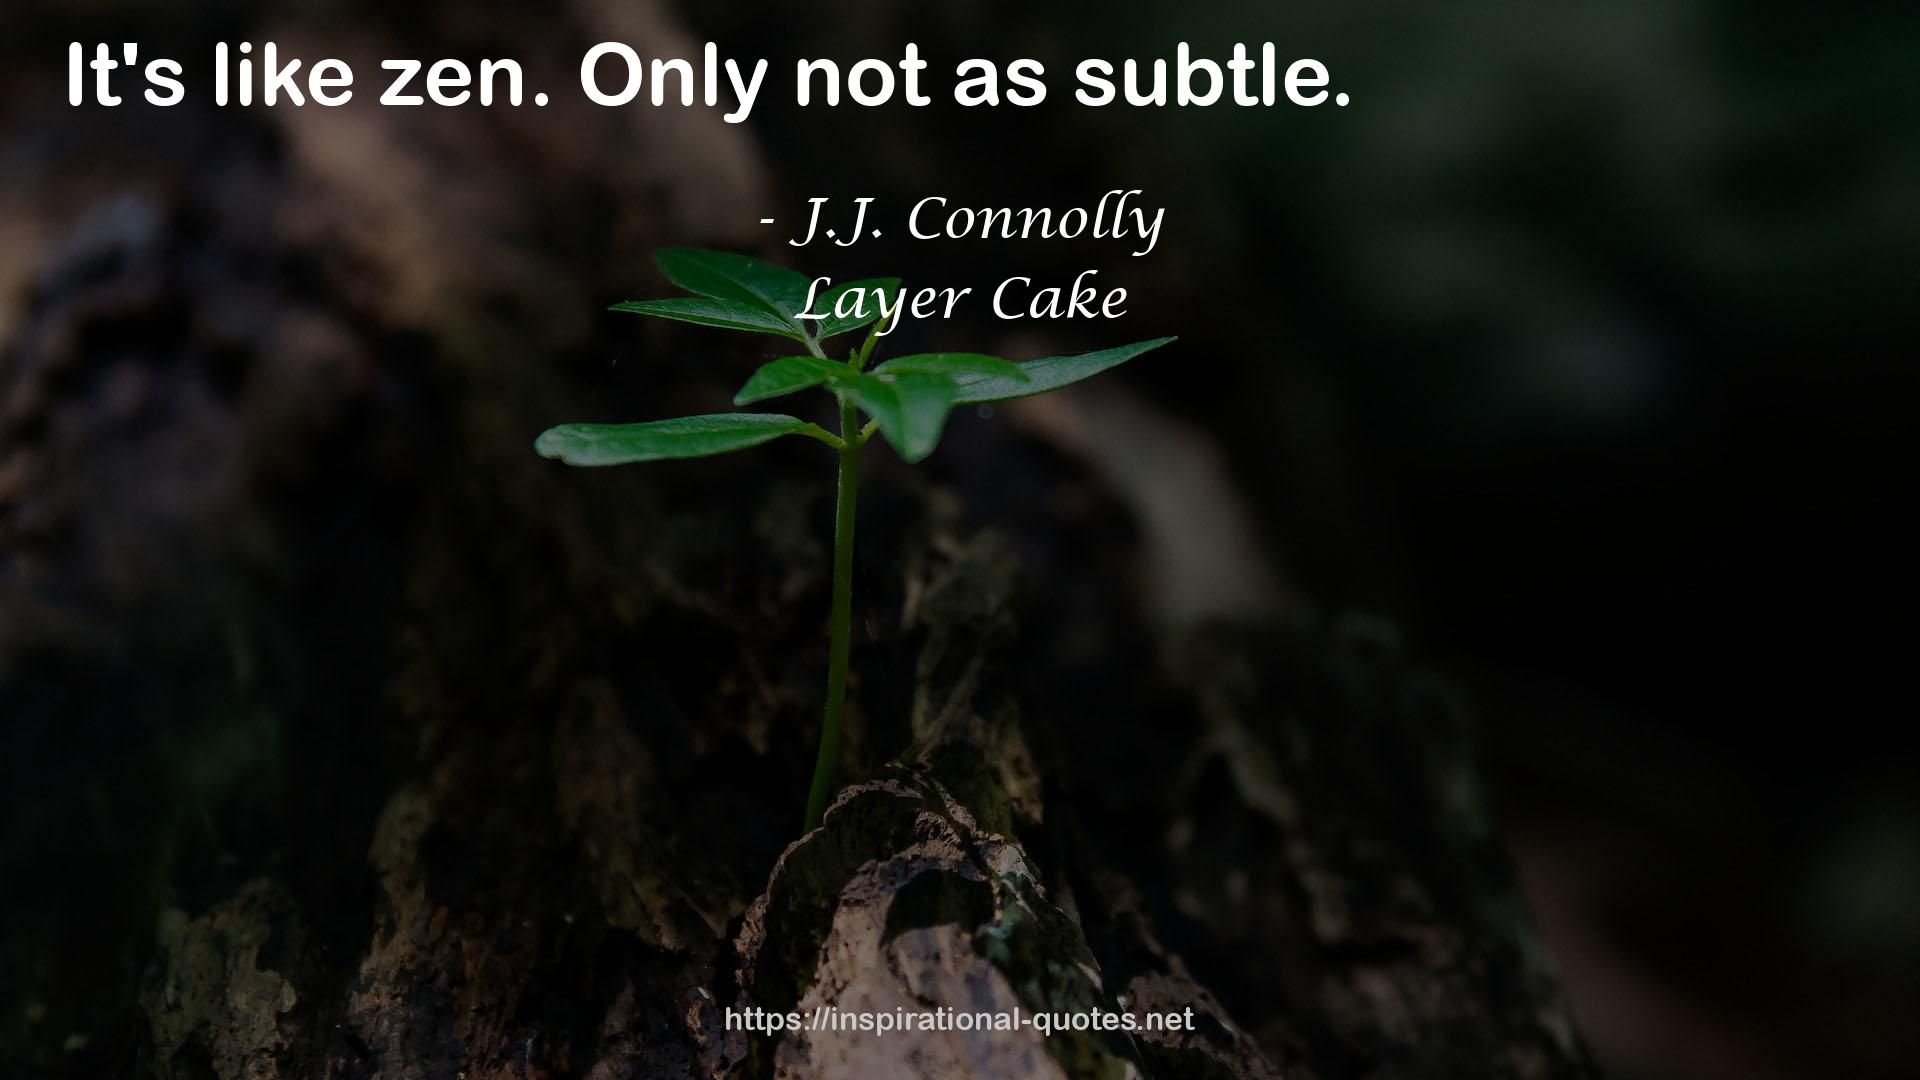 J.J. Connolly QUOTES